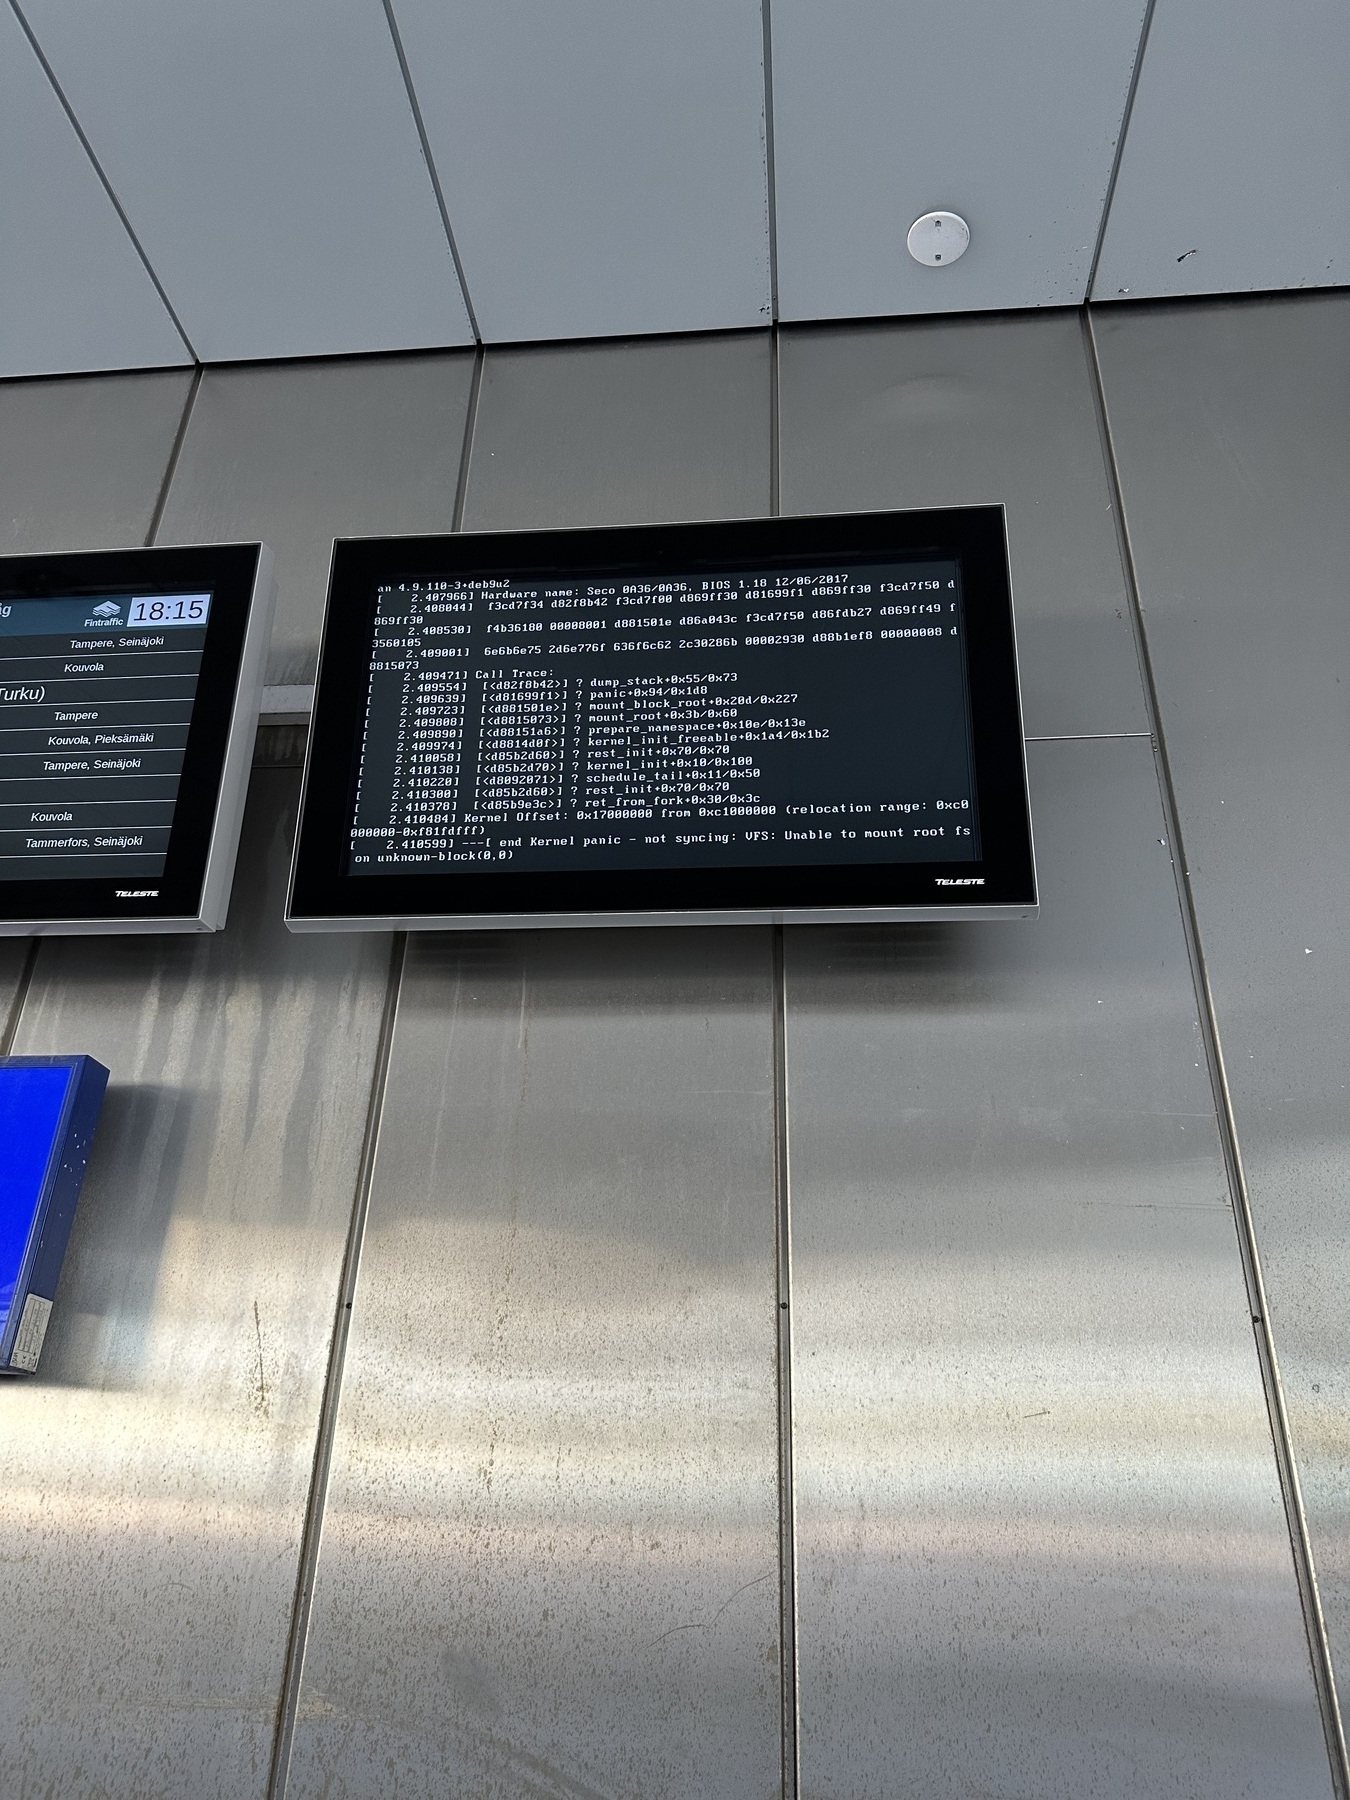 A information display hanging on a wall showing a kernel panic stack trace with ”mounting of virtual file system failed”-error message